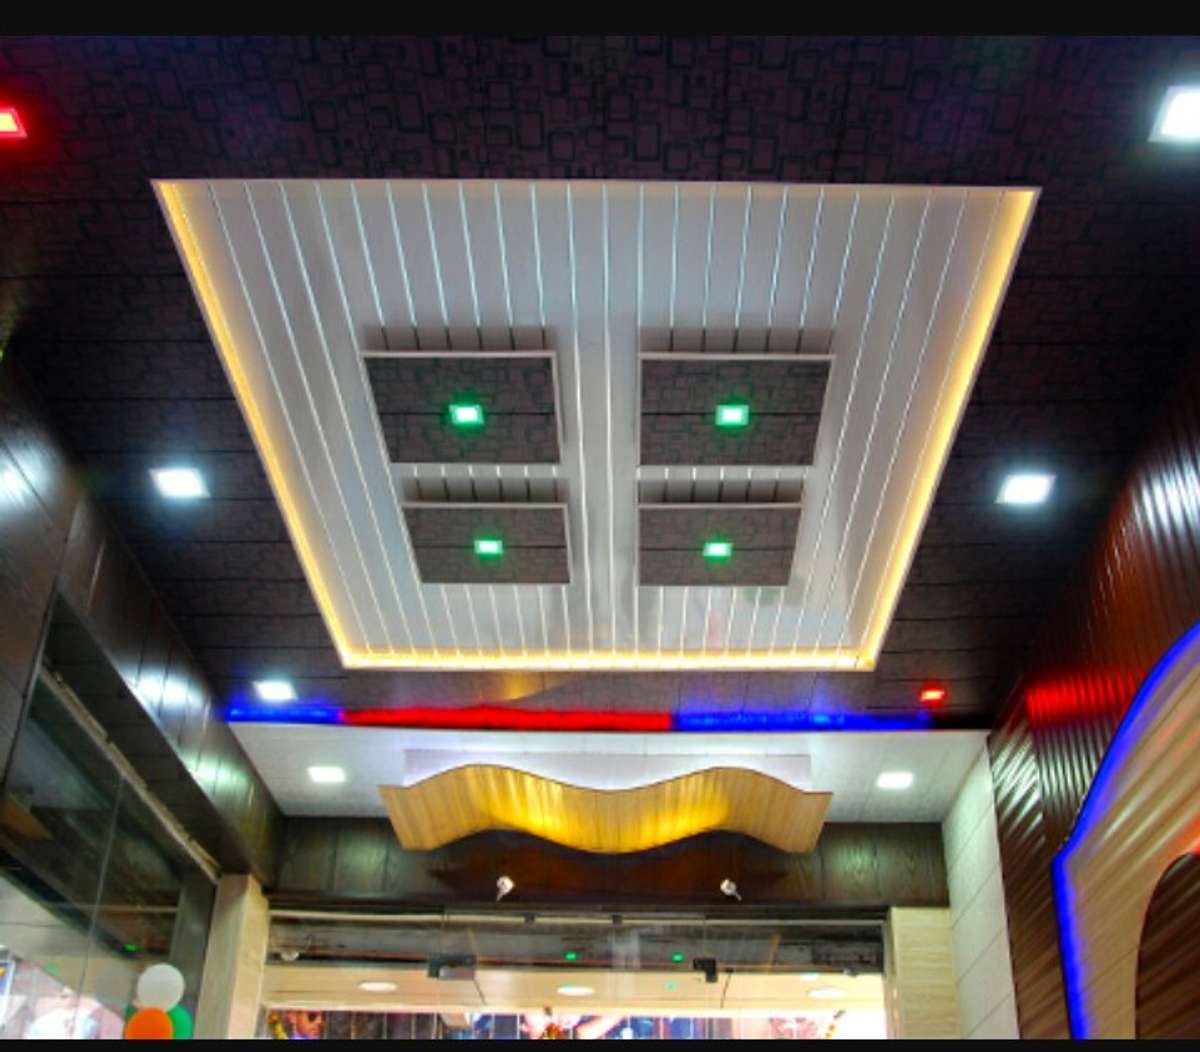 Ceiling, Lighting Designs by Civil Engineer SINGH CONSTRUCTION, Indore | Kolo